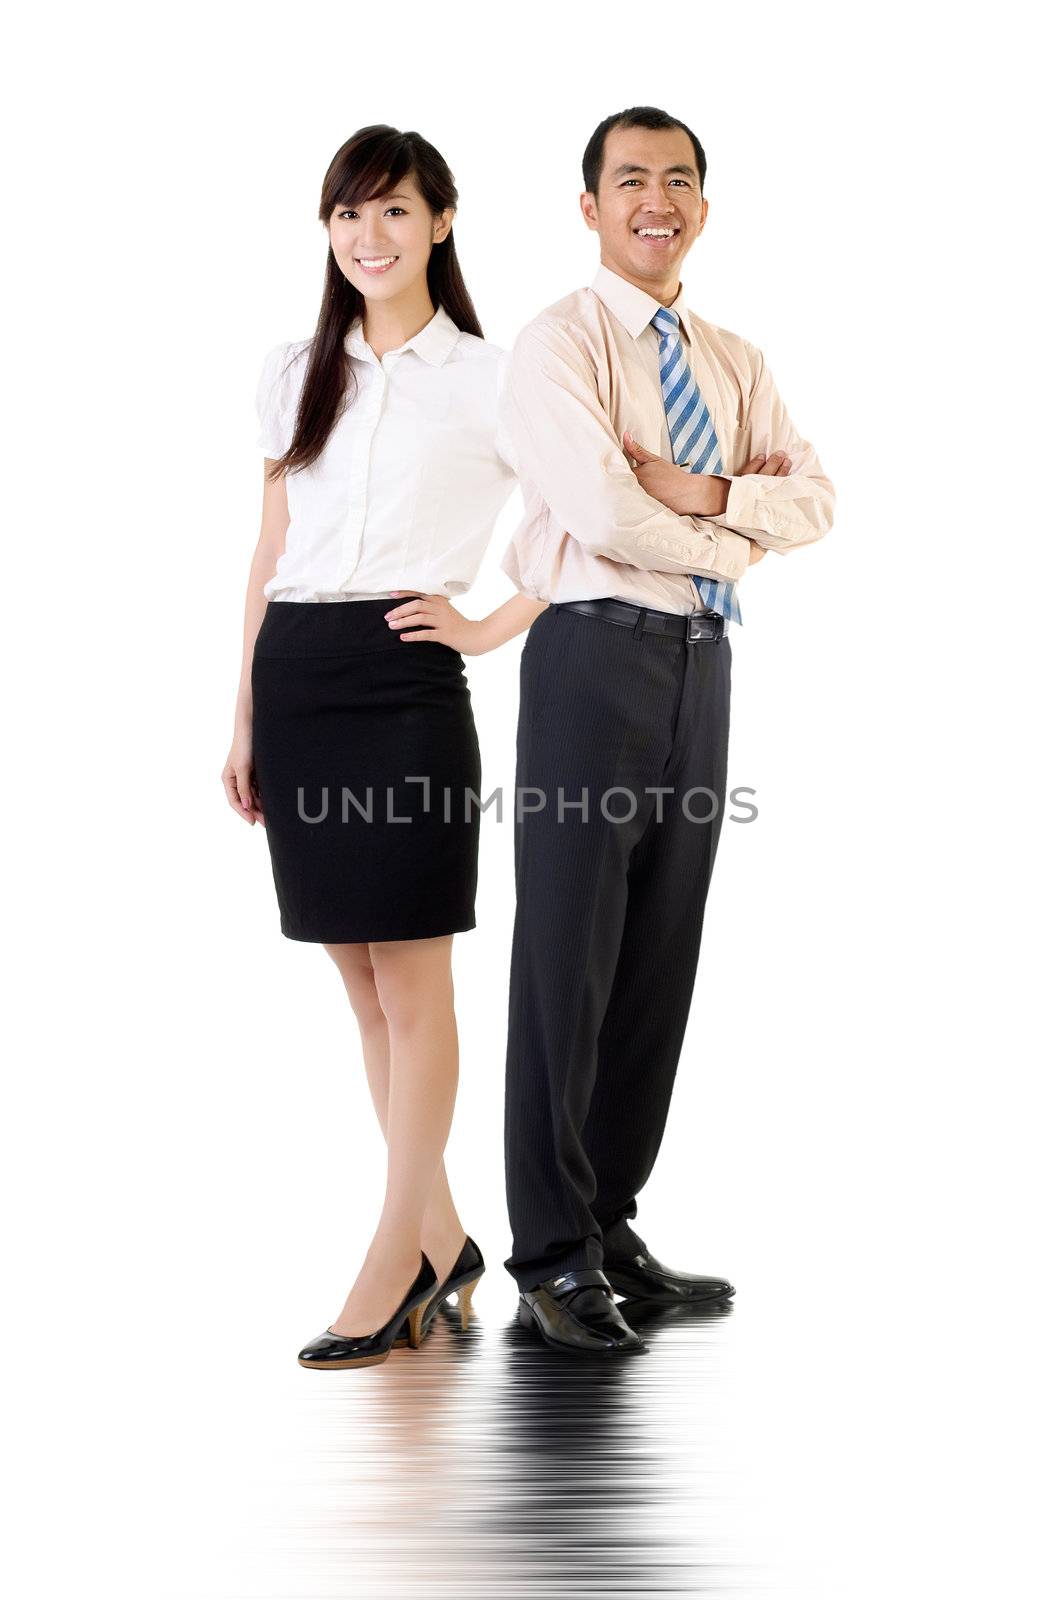 Asian business man and woman, full length portrait over white background.